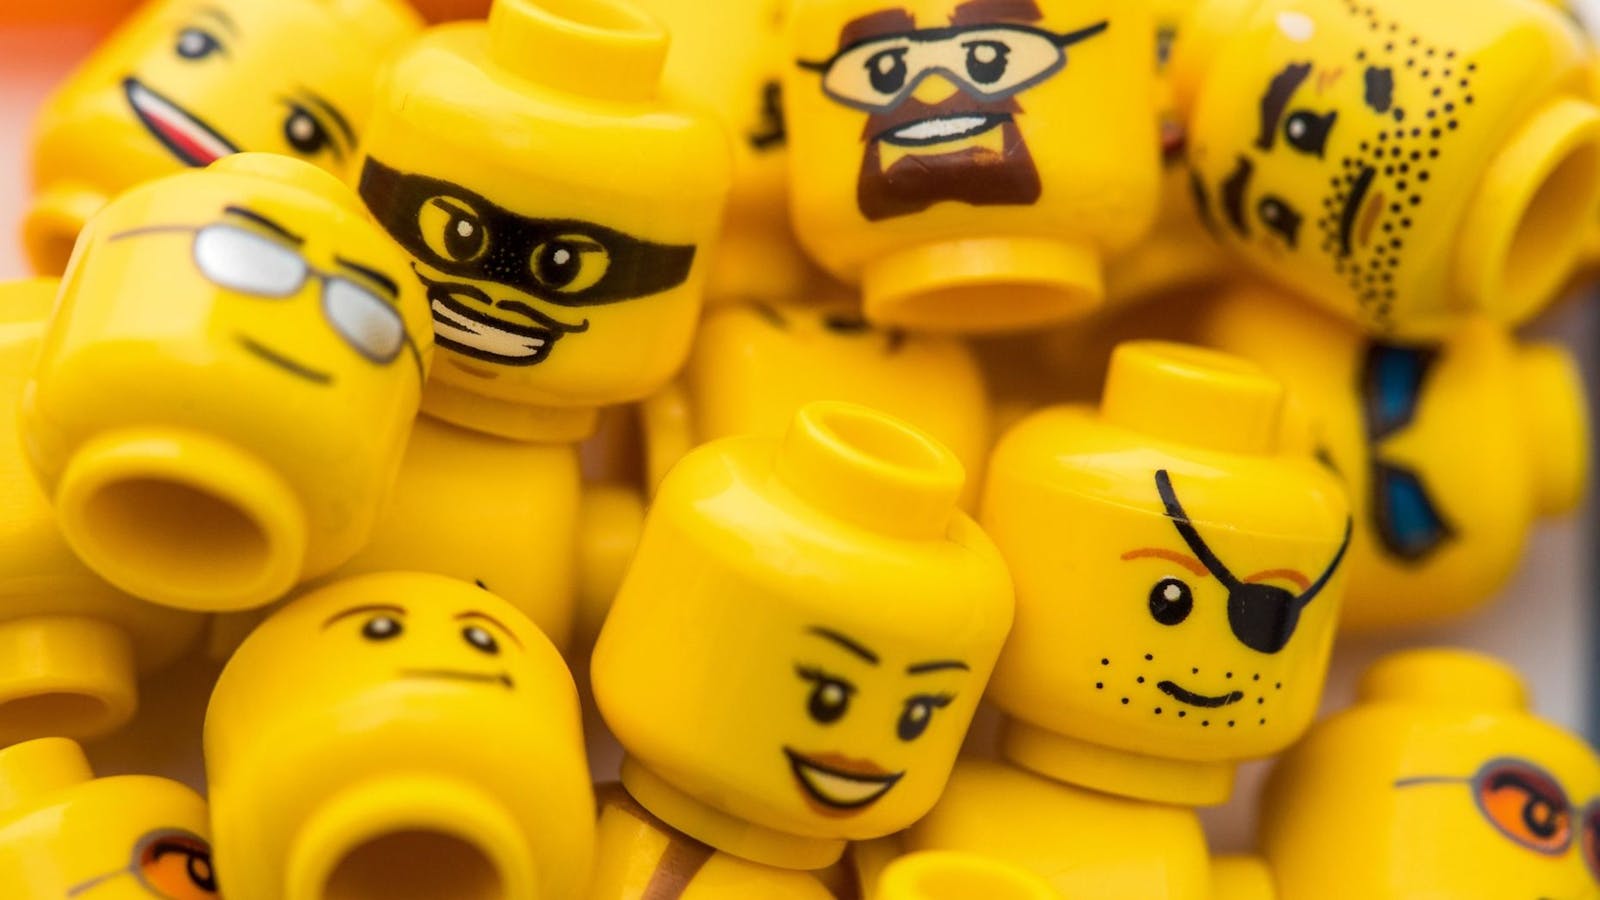 Minifigure faces, likely to be a fixture of Epic and Lego's joint metaverse venture. Photo: Bloomberg.